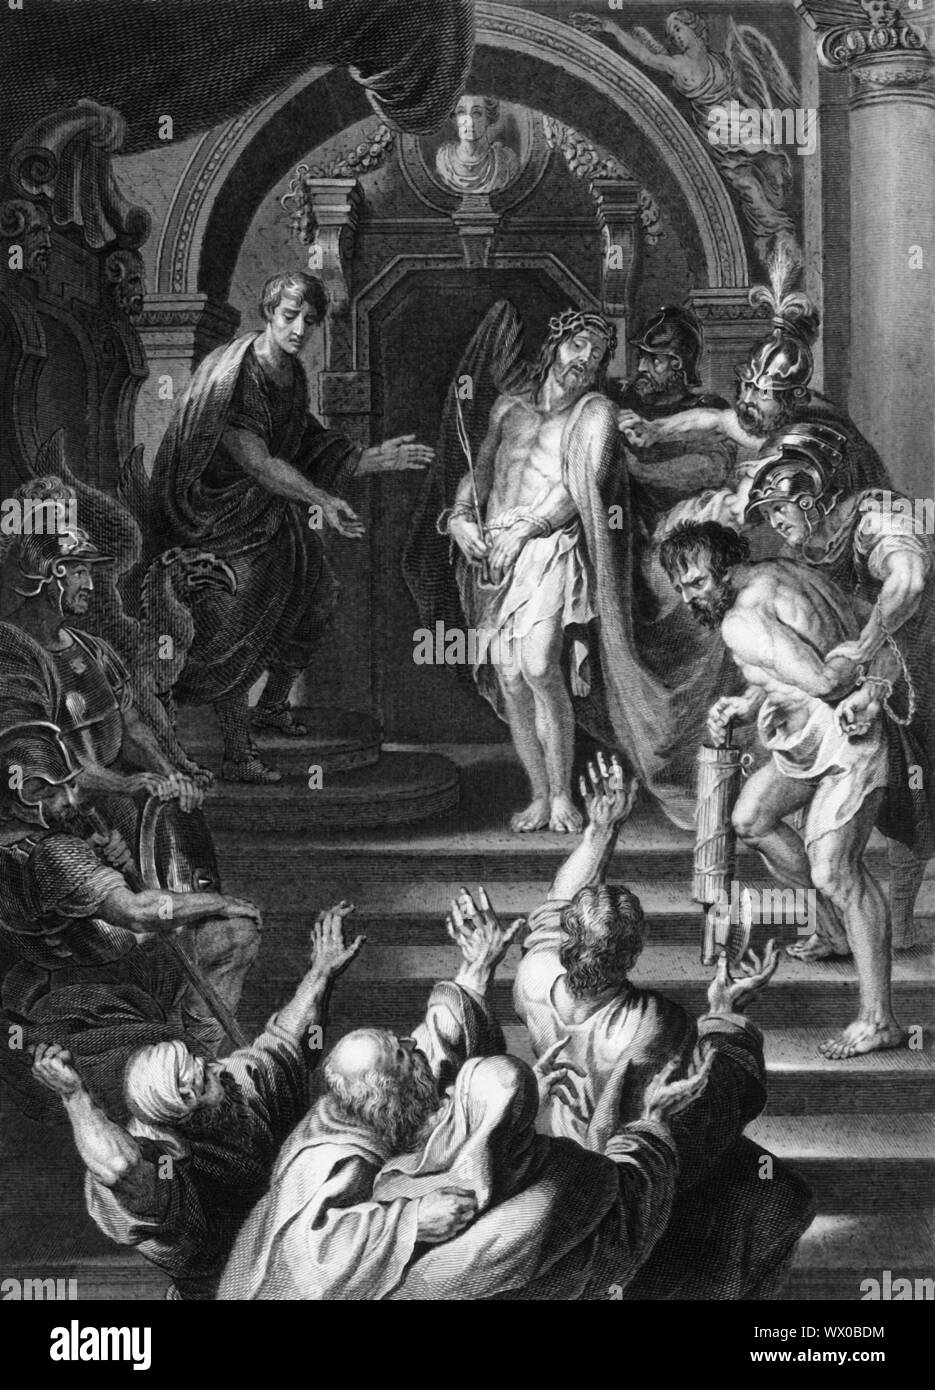 'They cried out, saying, Crucify him, crucify him', c1840. Biblical scene, from John 19: 6: 'When the chief priests therefore and officers saw him, they cried out, saying, Crucify him, crucify him. Pilate saith unto them, Take ye him, and crucify him: for I find no fault in him.' Jesus Christ is tried before Pontius Pilate, governor of the Roman province of Judaea, and is condemned to death. Engraving after an early 17th century painting by Rubens. Stock Photo